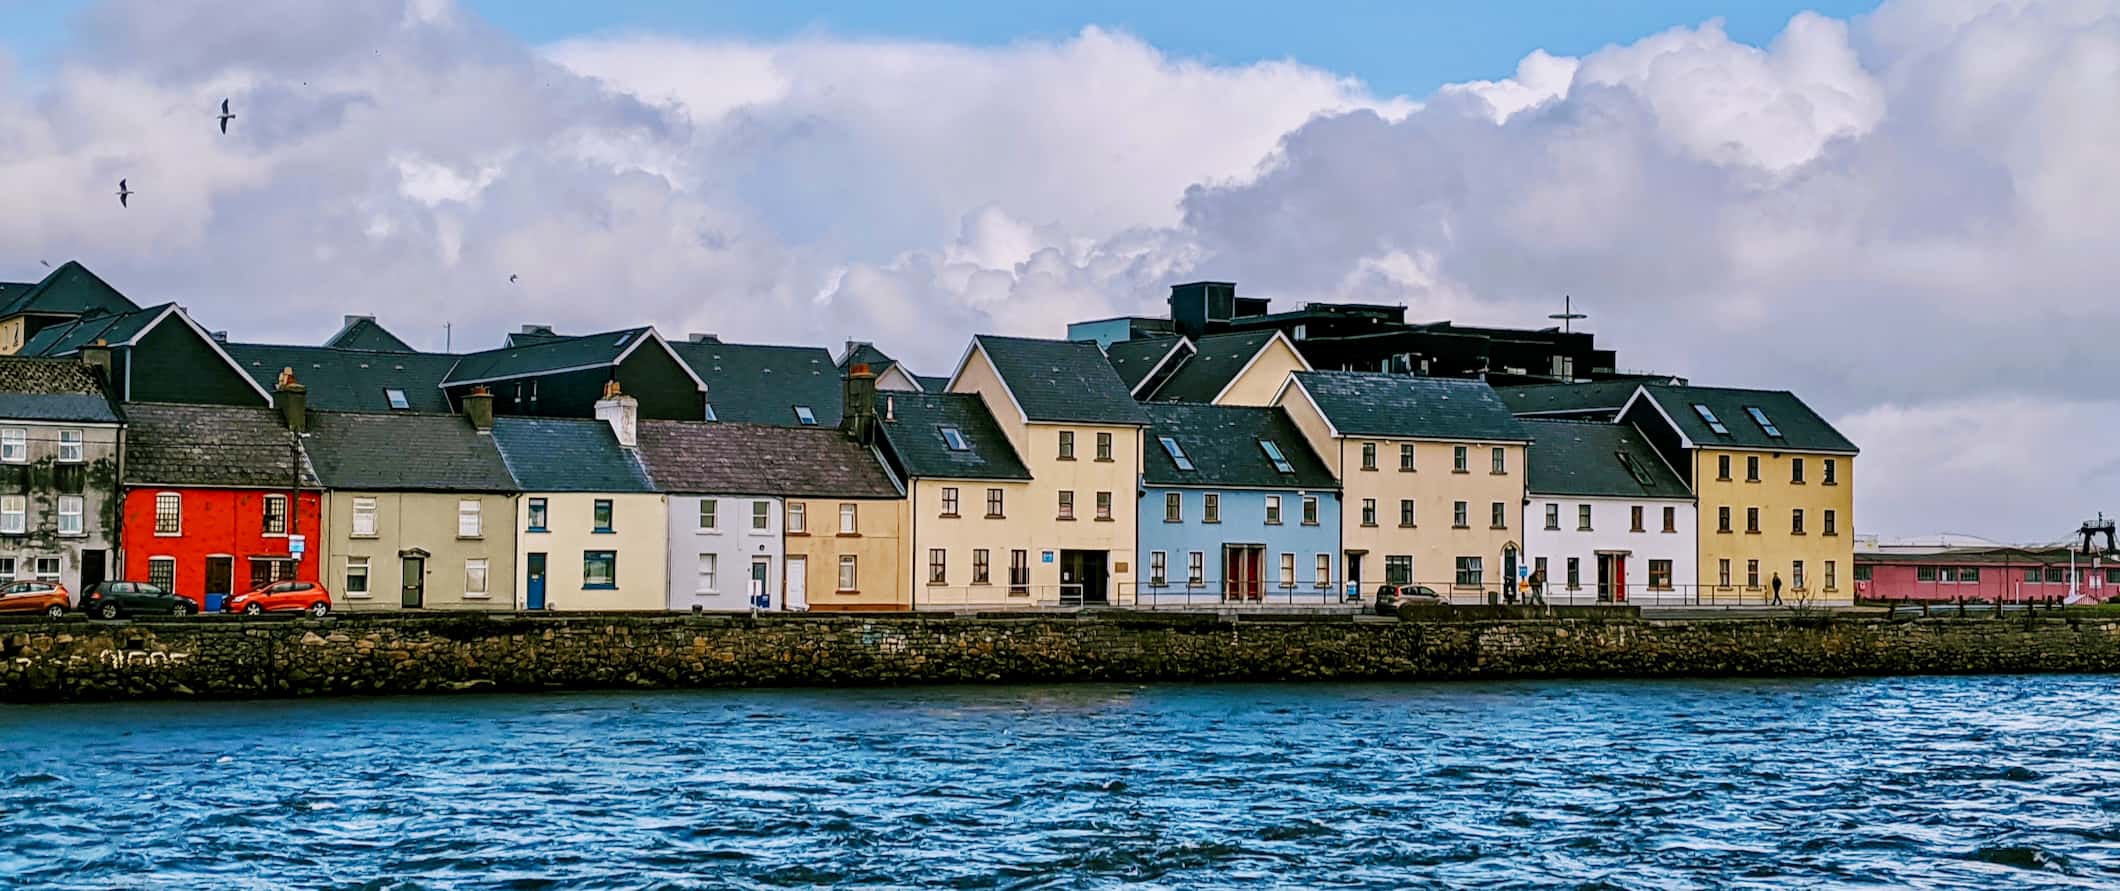 The colorful houses along the coast of Galway, Ireland